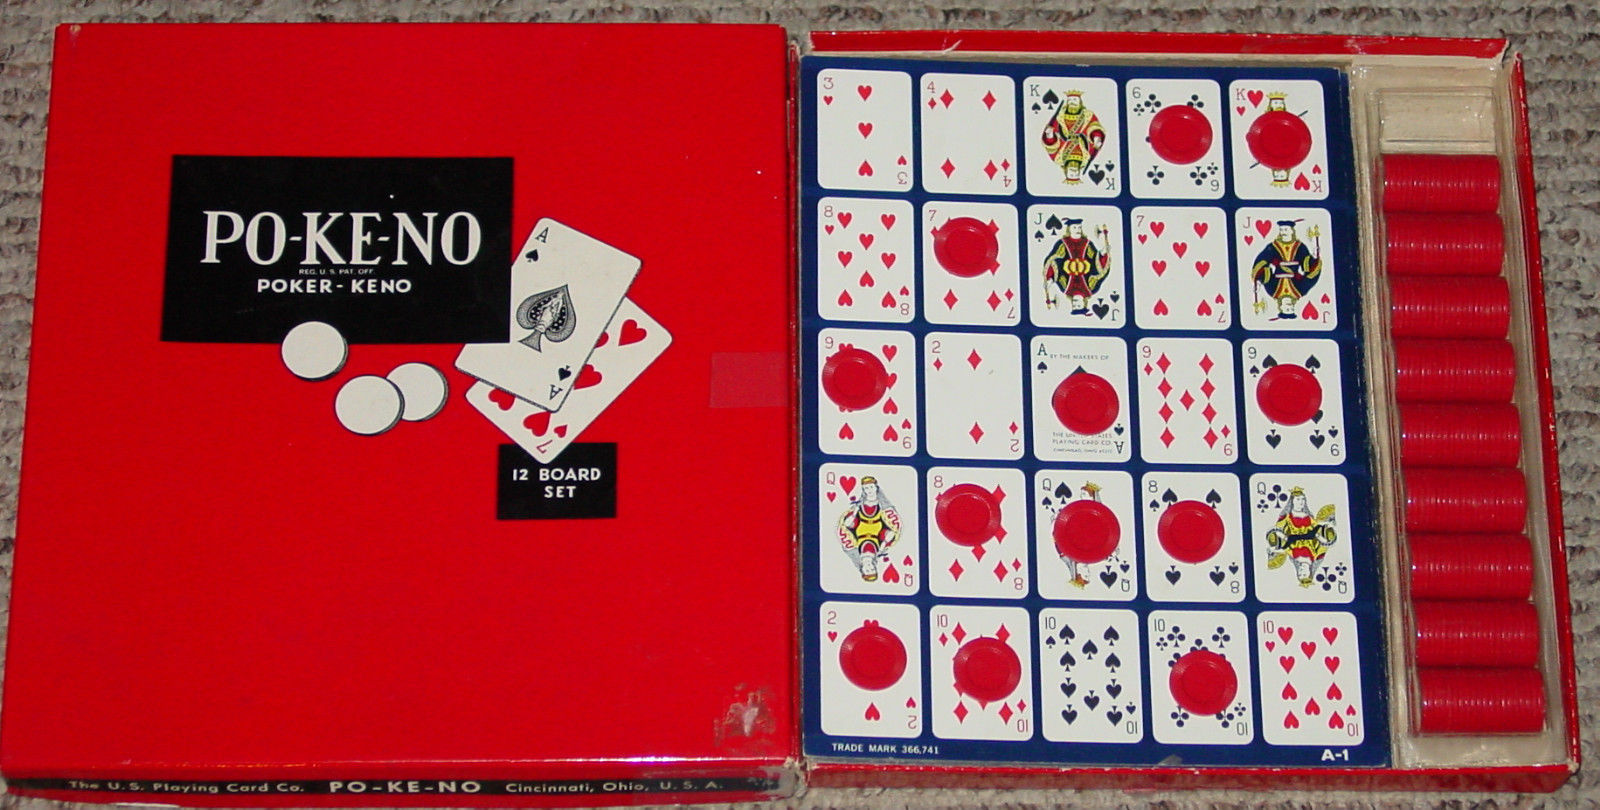 ORIGINAL POKENO GAME BY BICYCLE 12 UNIQUE BOARDS FOR UP TO 12 PLAYERS 